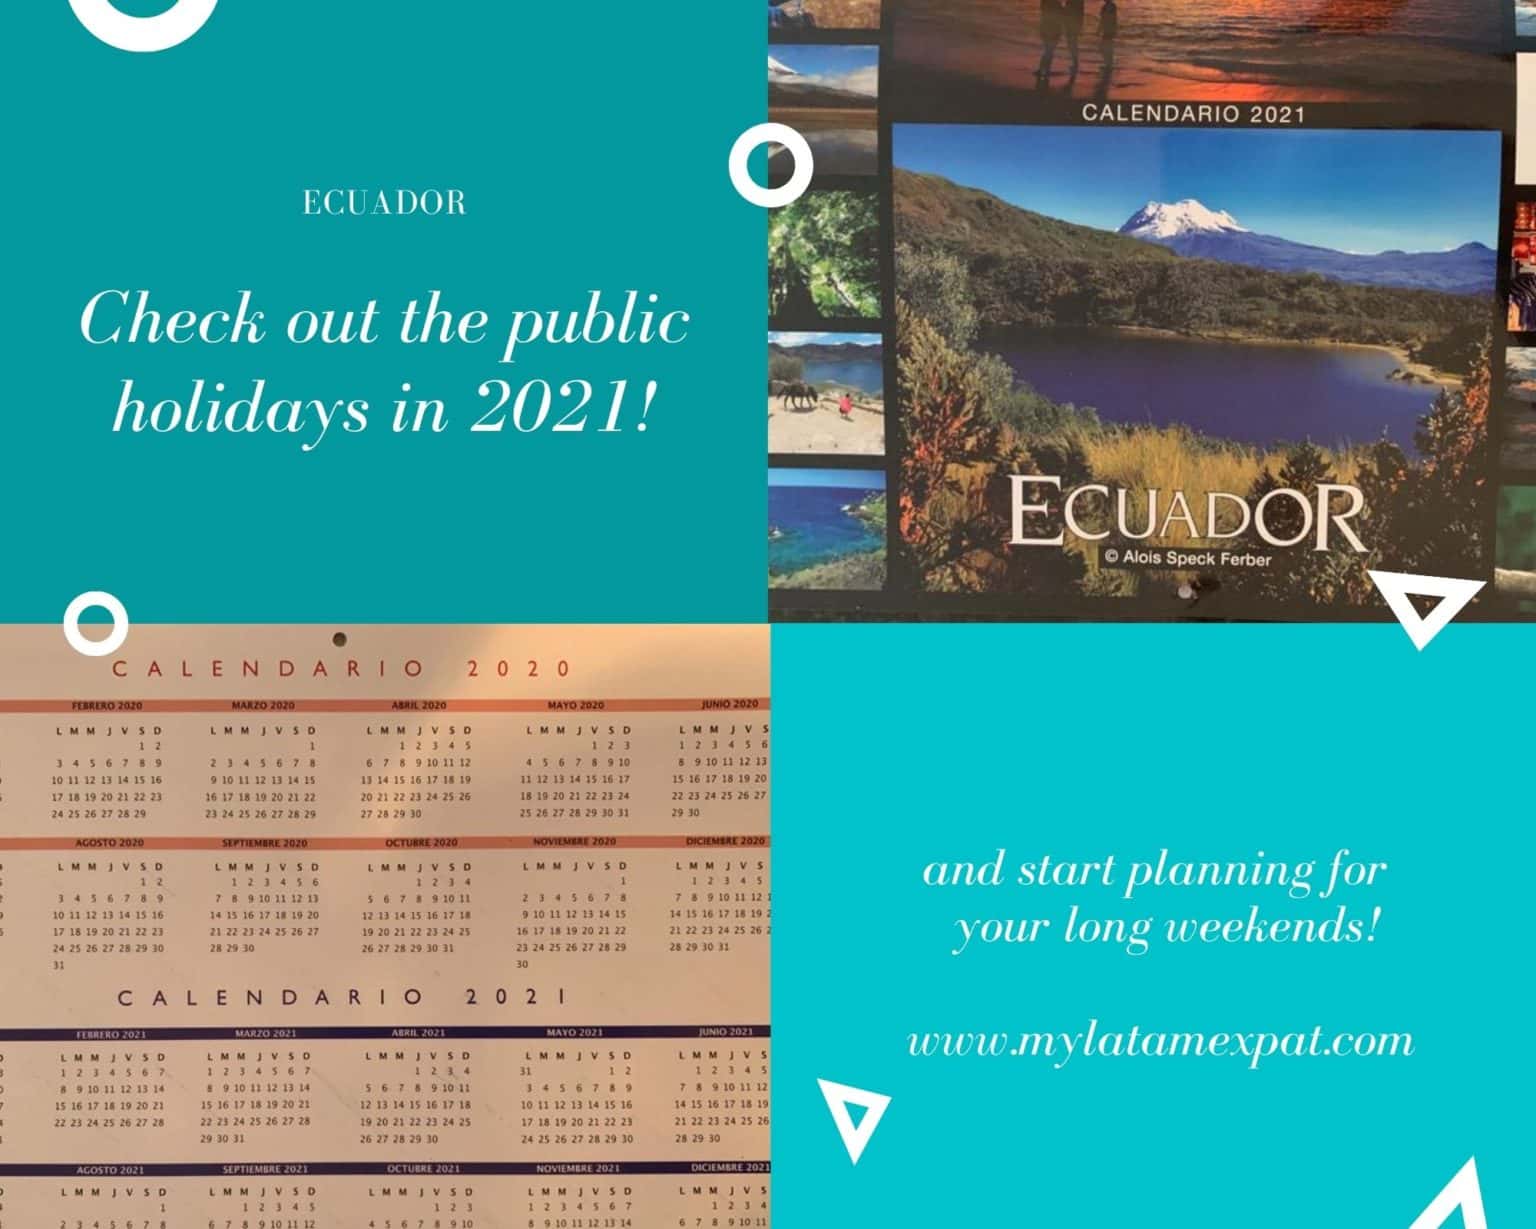 Check out public holidays in Ecuador for 2021 ! - My Latam Expat